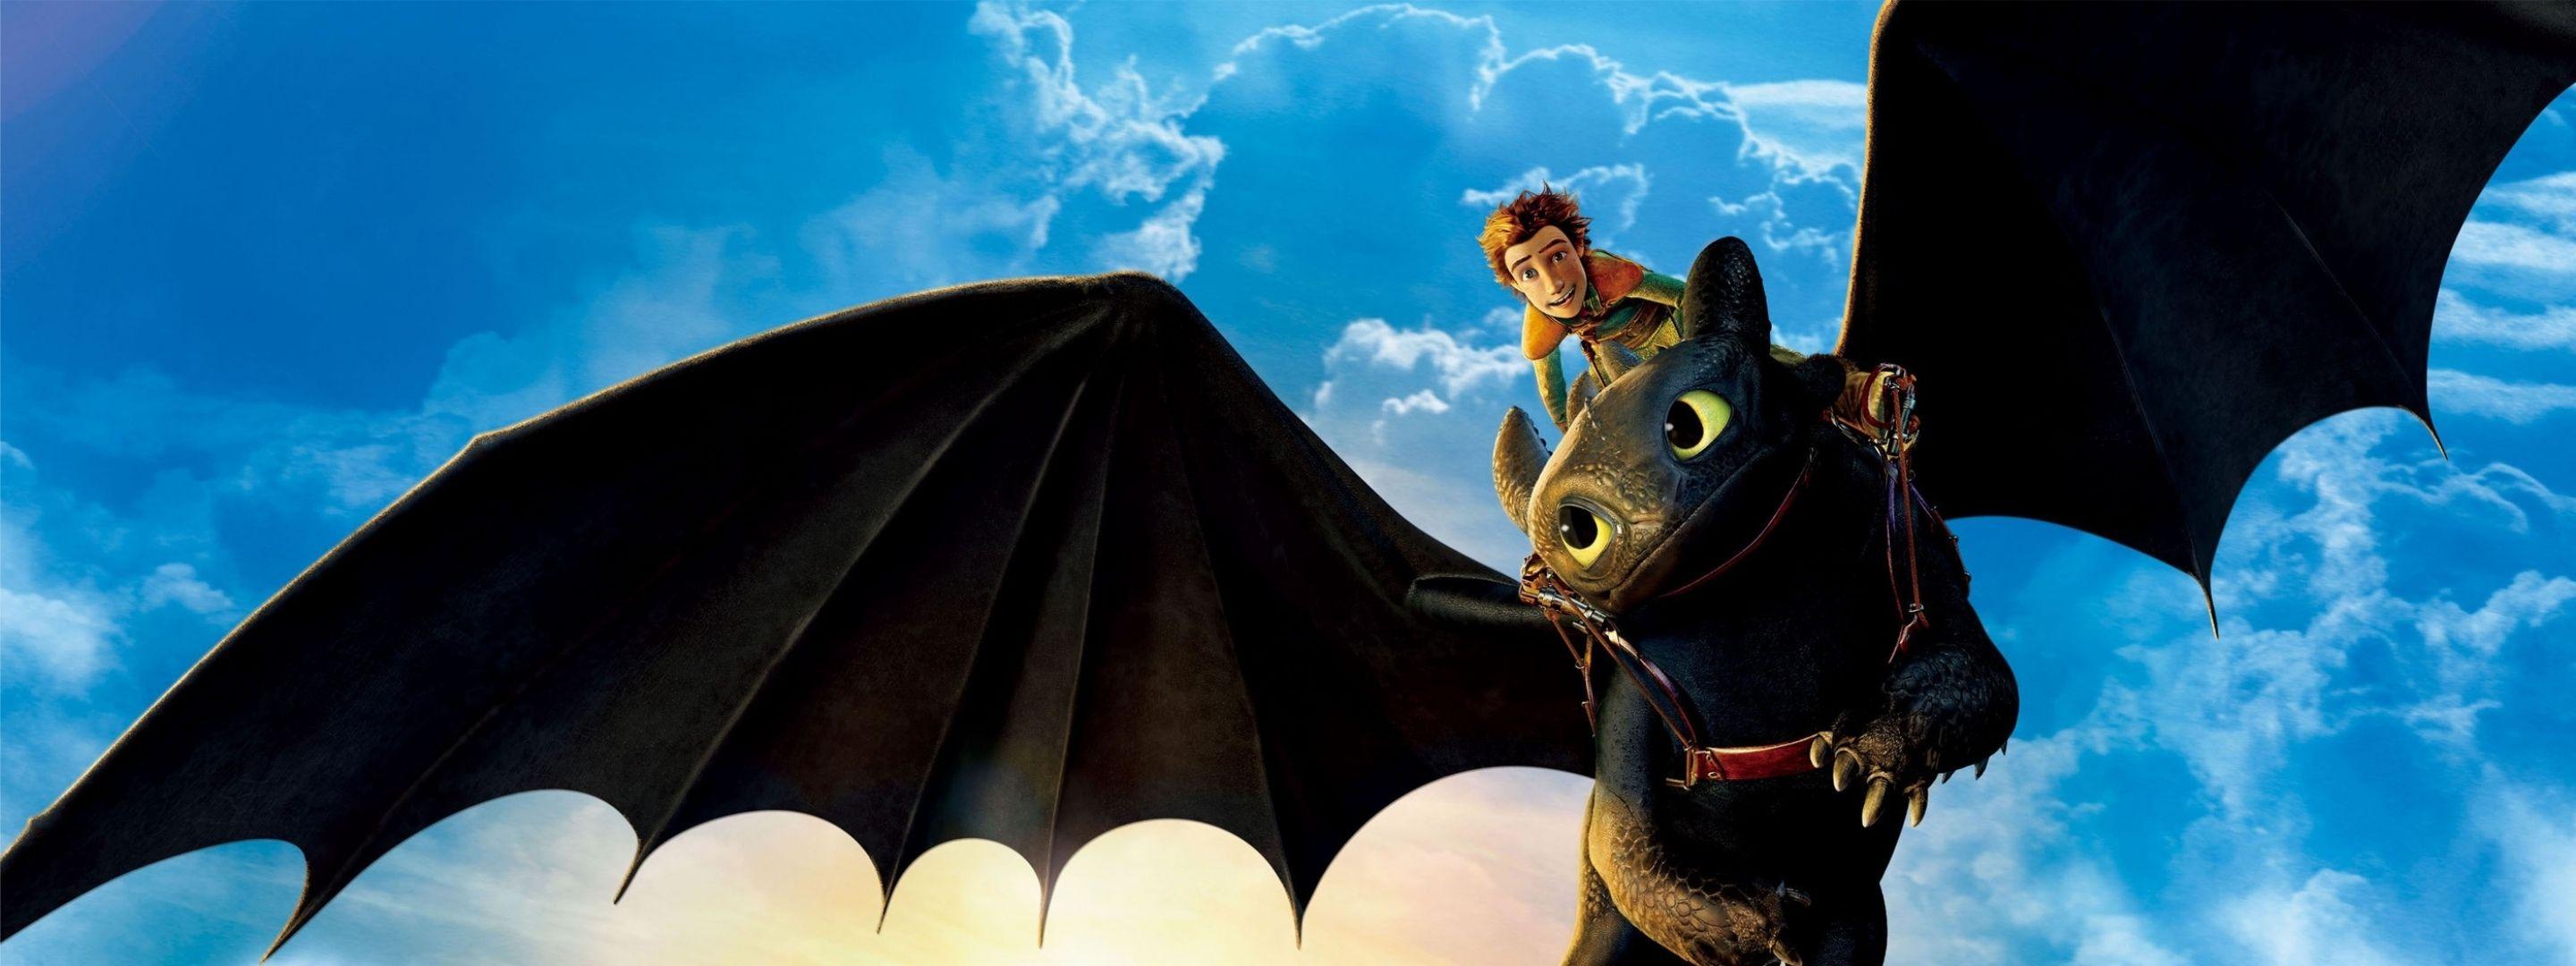 Hiccup and Toothless Desktop Background Wallpaper Free Download